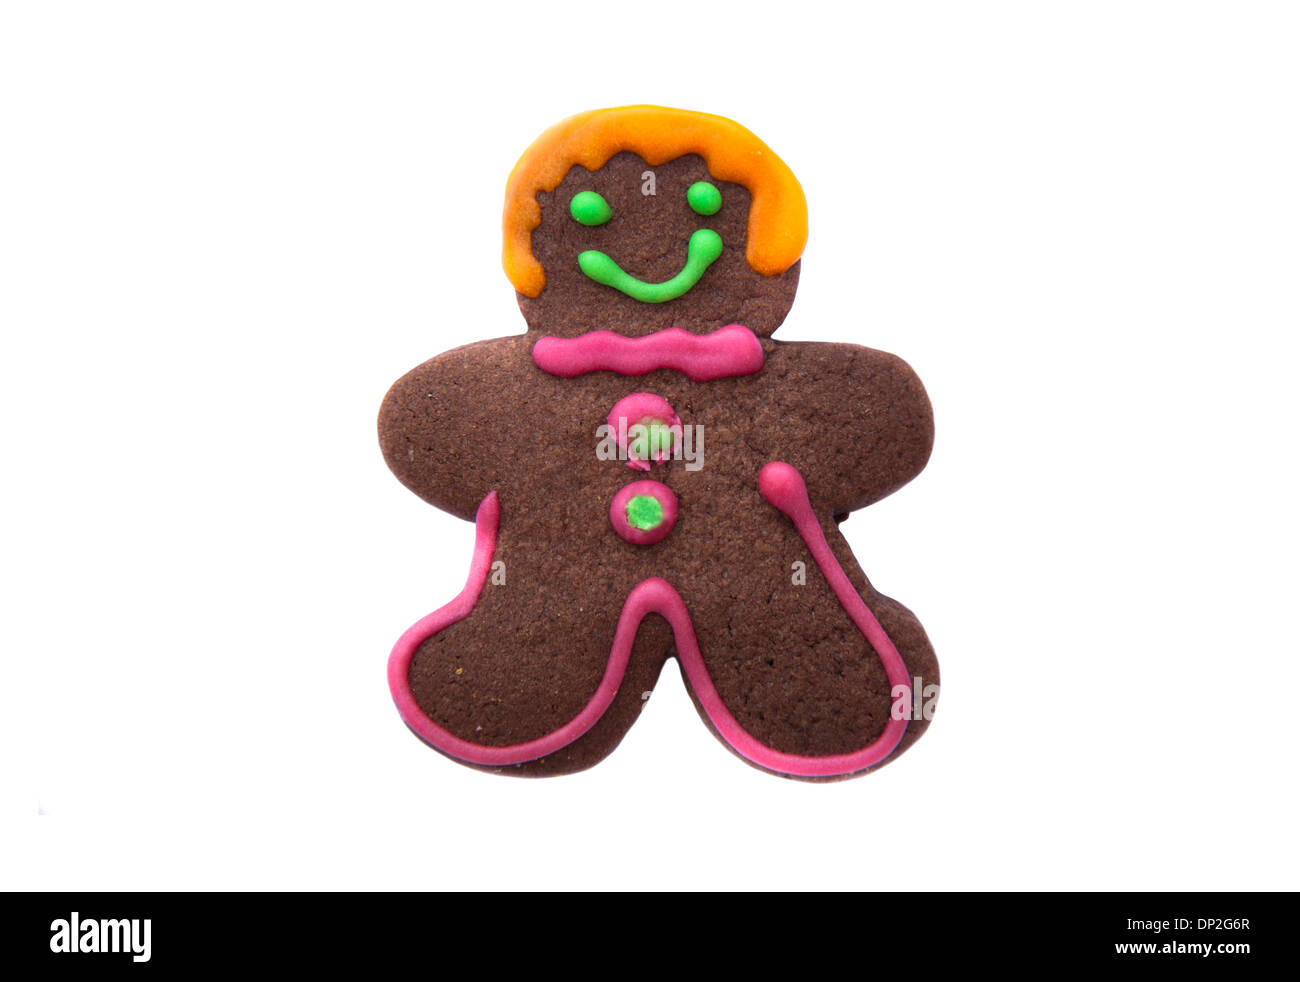 A gingerbread man biscuit decorated with vibrant colors Stock Photo